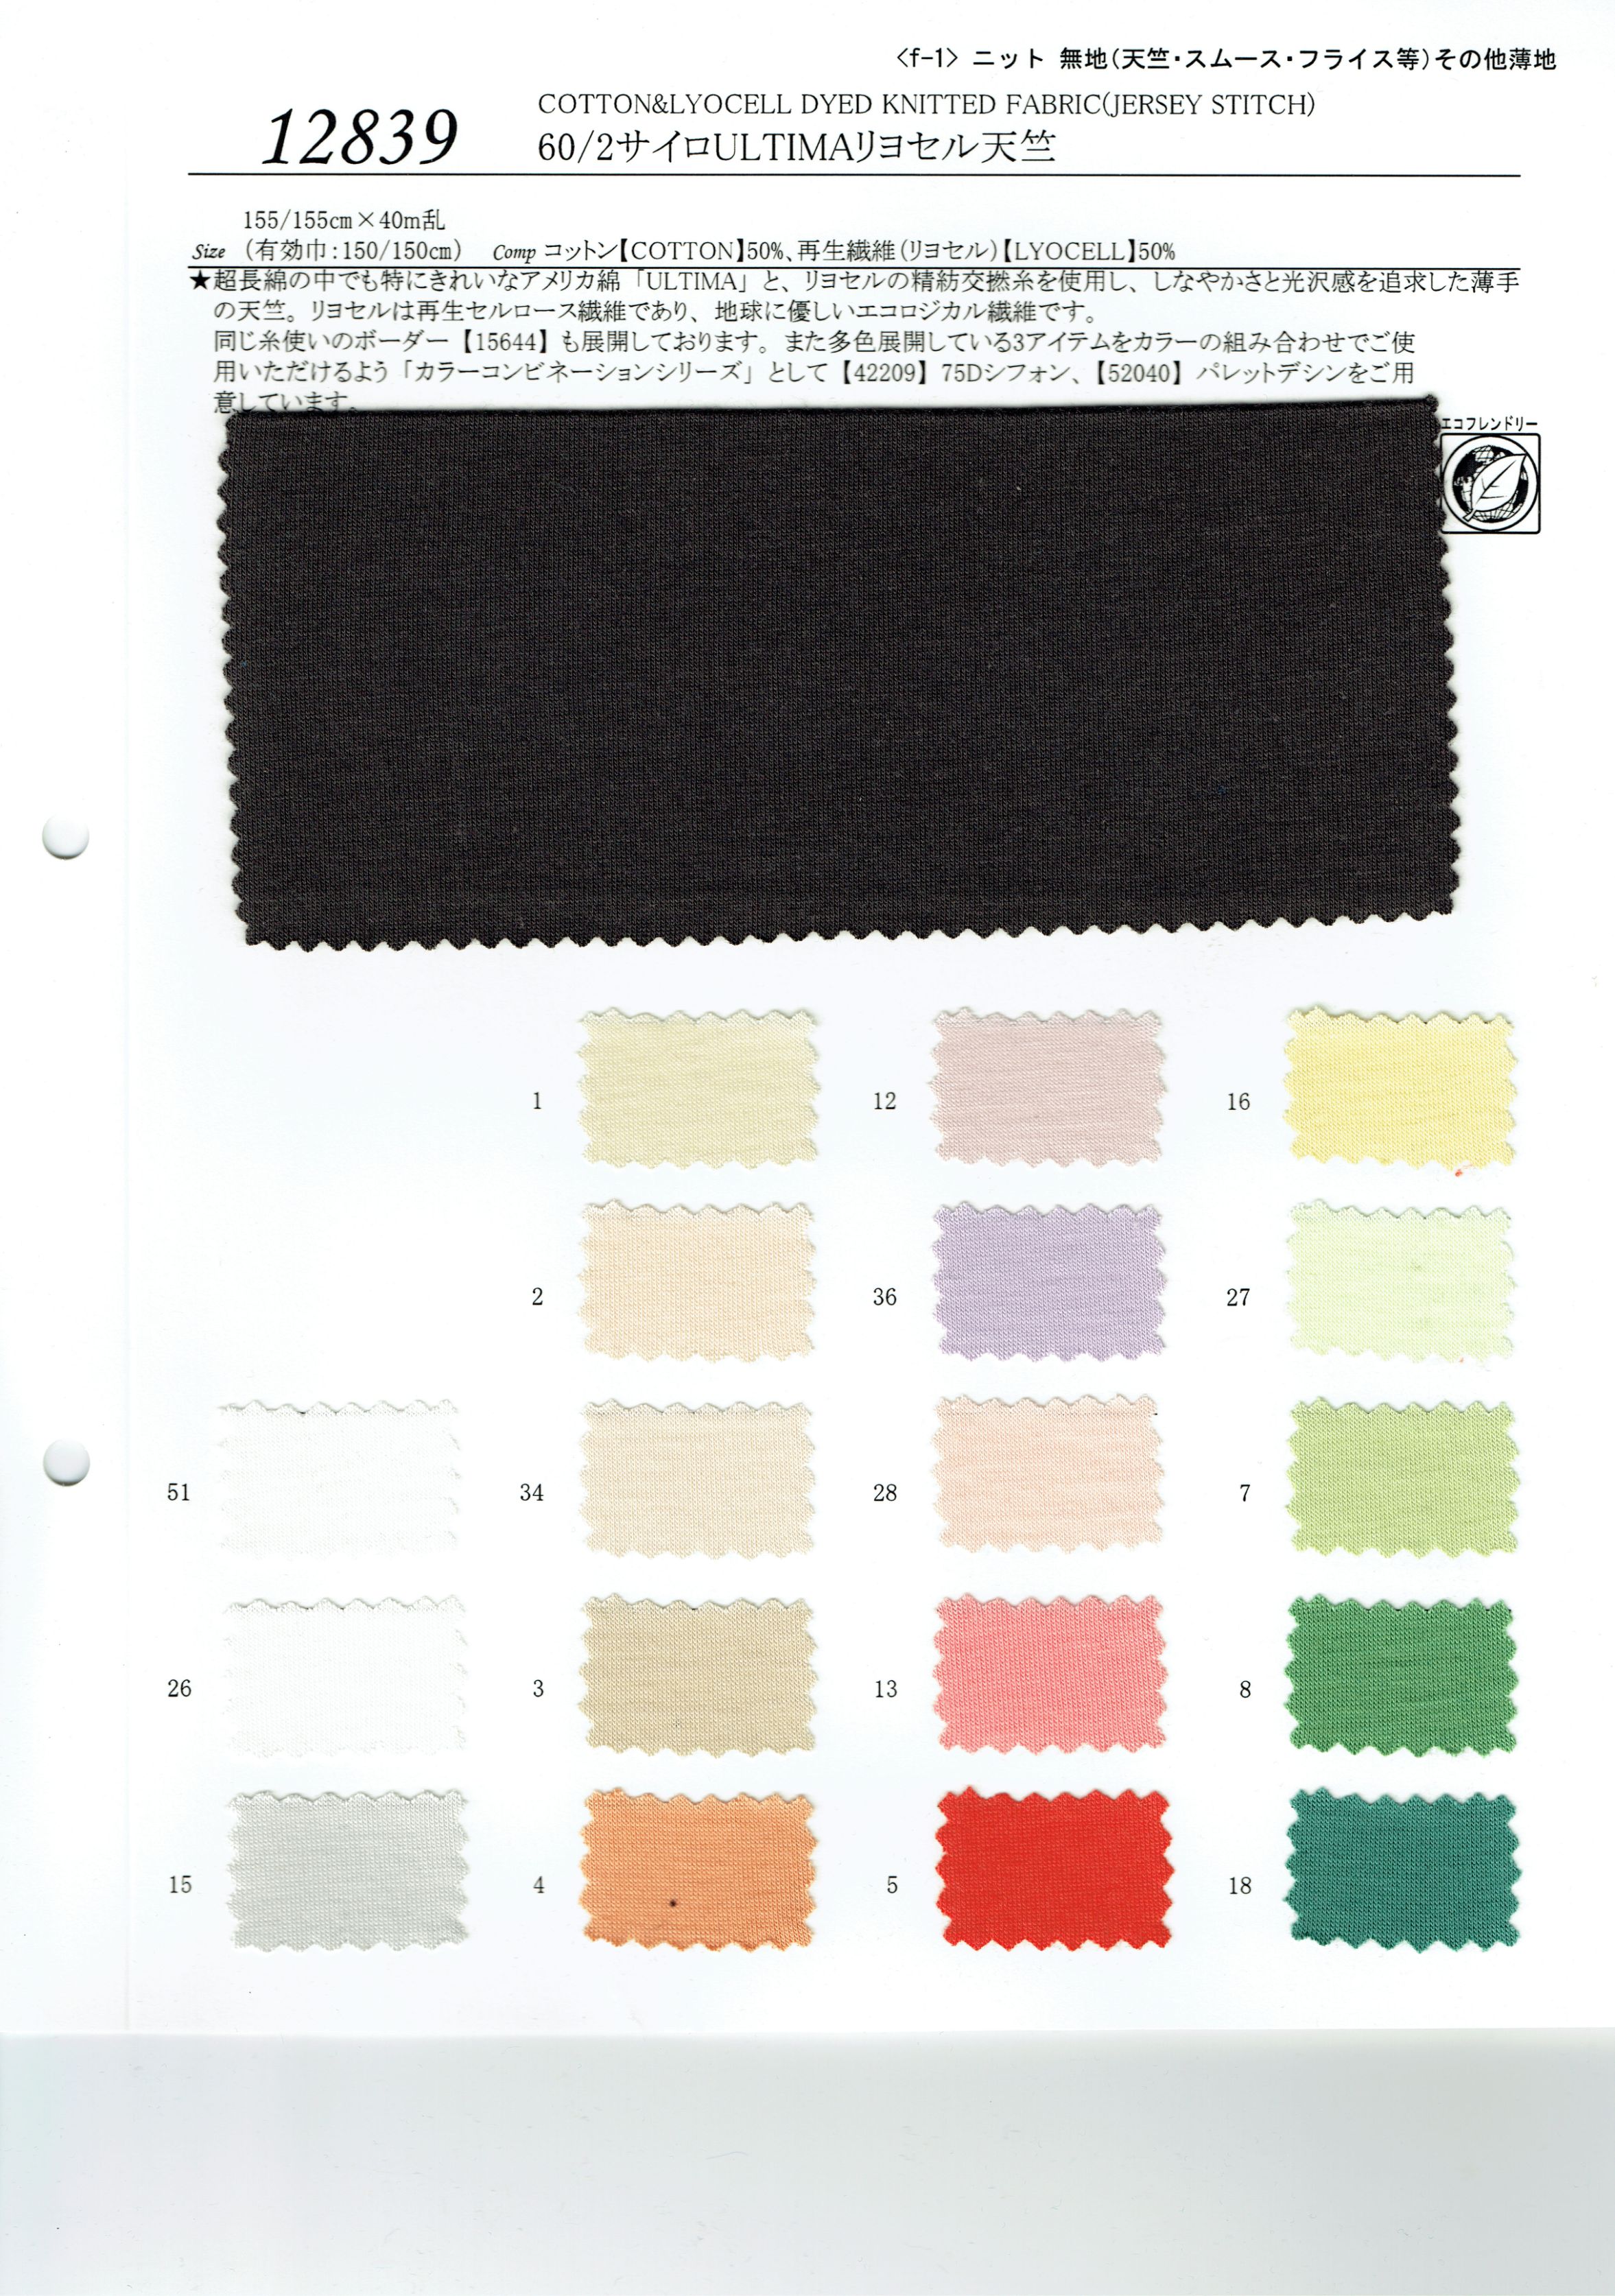 View COTTON50/[LYOCELL]50/[50%]LYOCELL DYED KNITTED FABRIC[JERSEY STITCH]LYOCELL DYED KNITTED FABRIC[JERSEY STITCH]